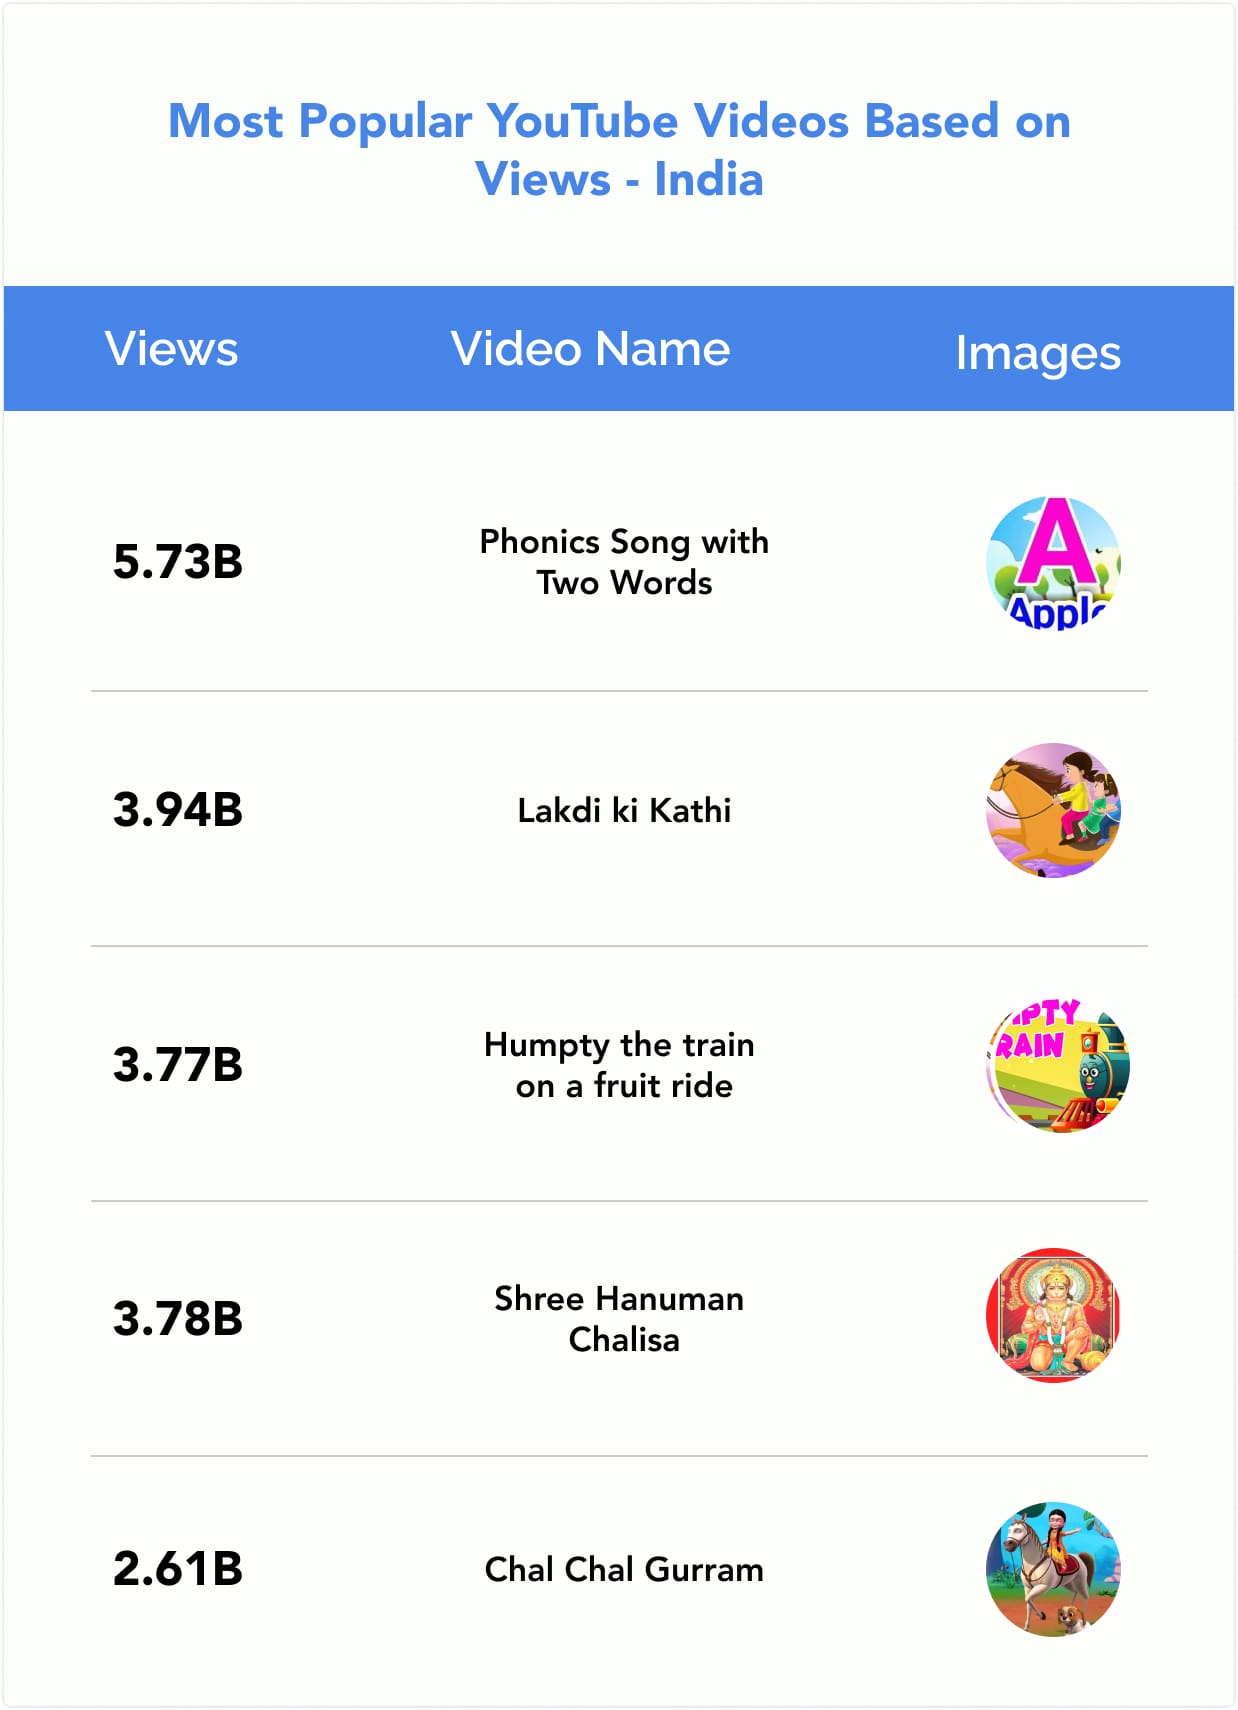 Most Popular YouTube Videos Based on Views - India